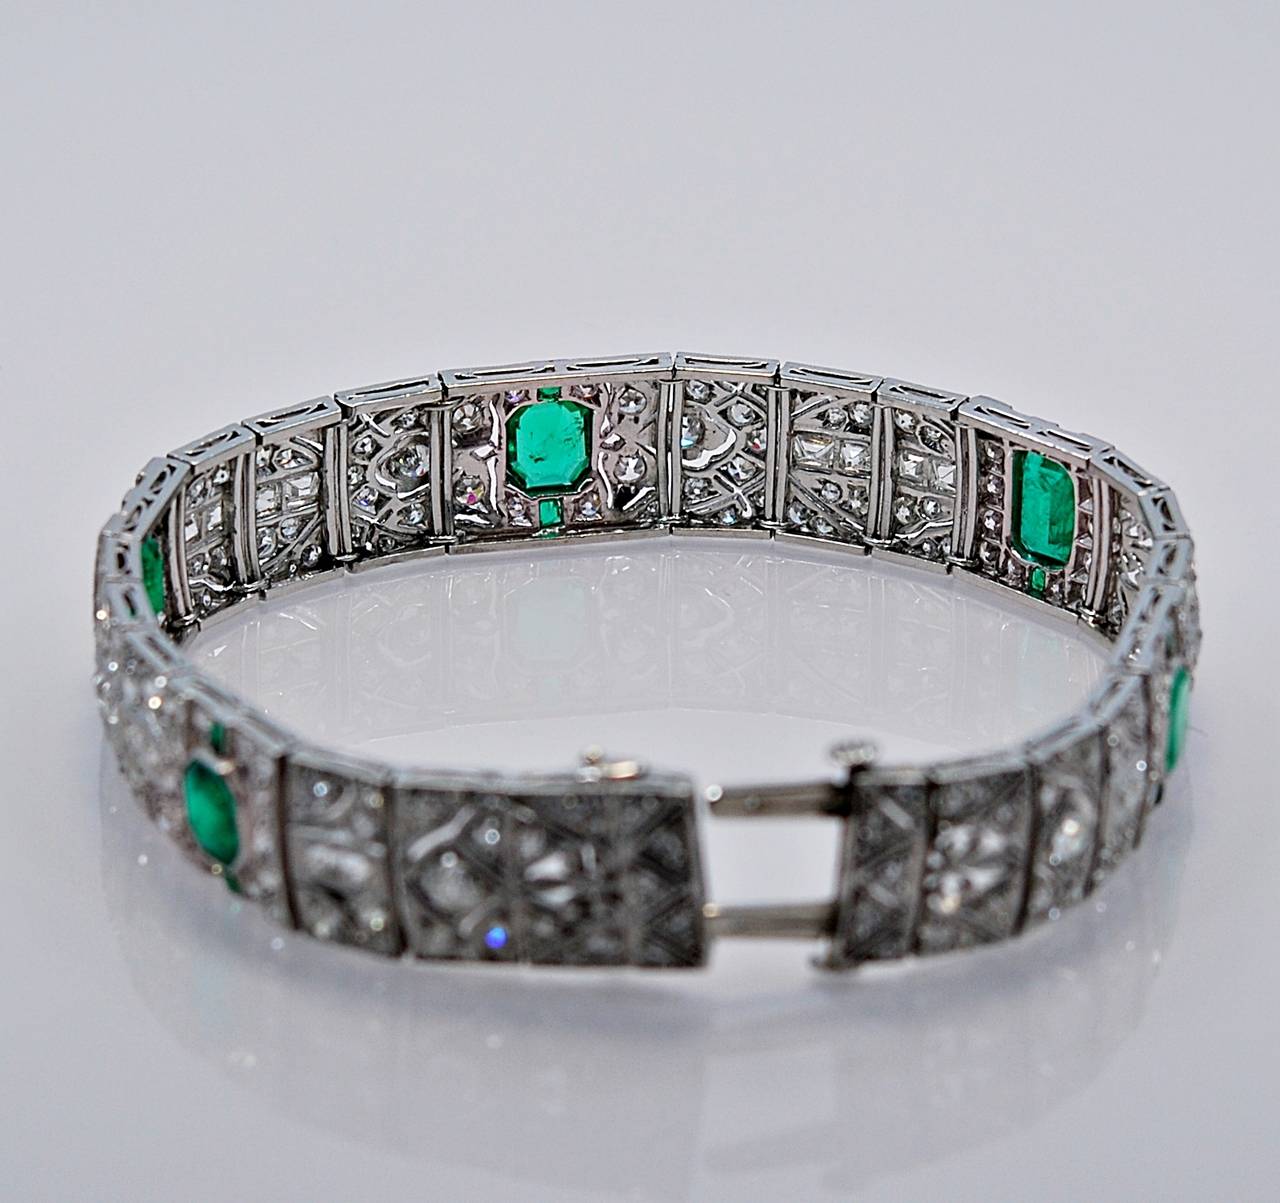 J35142

REASONABLE OFFERS CONSIDERED!

Extremely fine Art Deco platinum, diamond, and emerald bracelet. Beautifully constructed in platinum and contains approximately 6 carats of fine diamonds and approximately 5 carats of fine Columbian